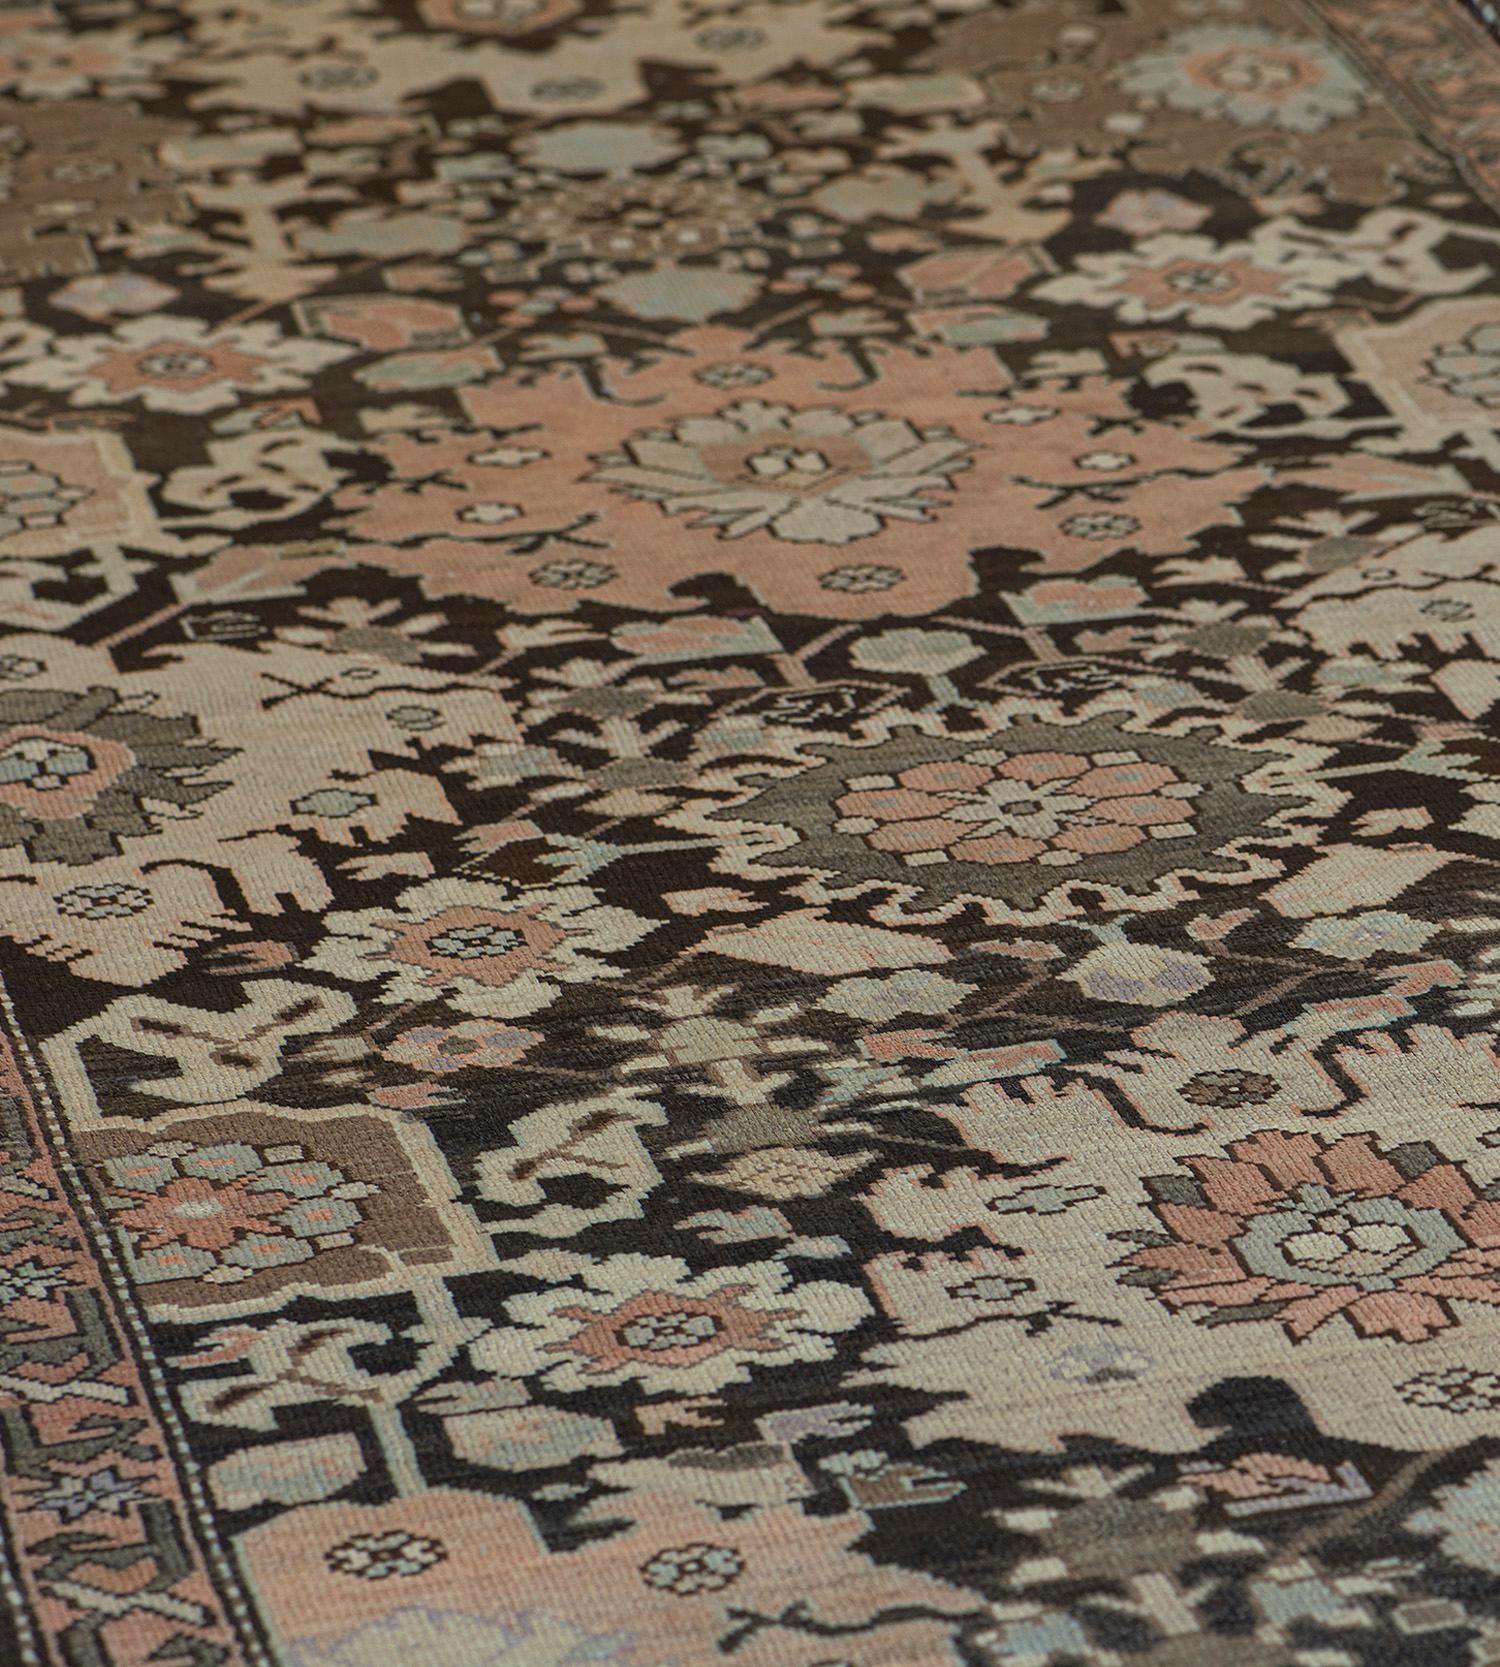 This traditional handwoven Persian Karabagh rug has a deep umber field with broad sweeping palmettes issuing angled floral geometric vine lattice, in a dusty peach angled floral vine border.

This Runner matches Item Ref: LU1518219945292